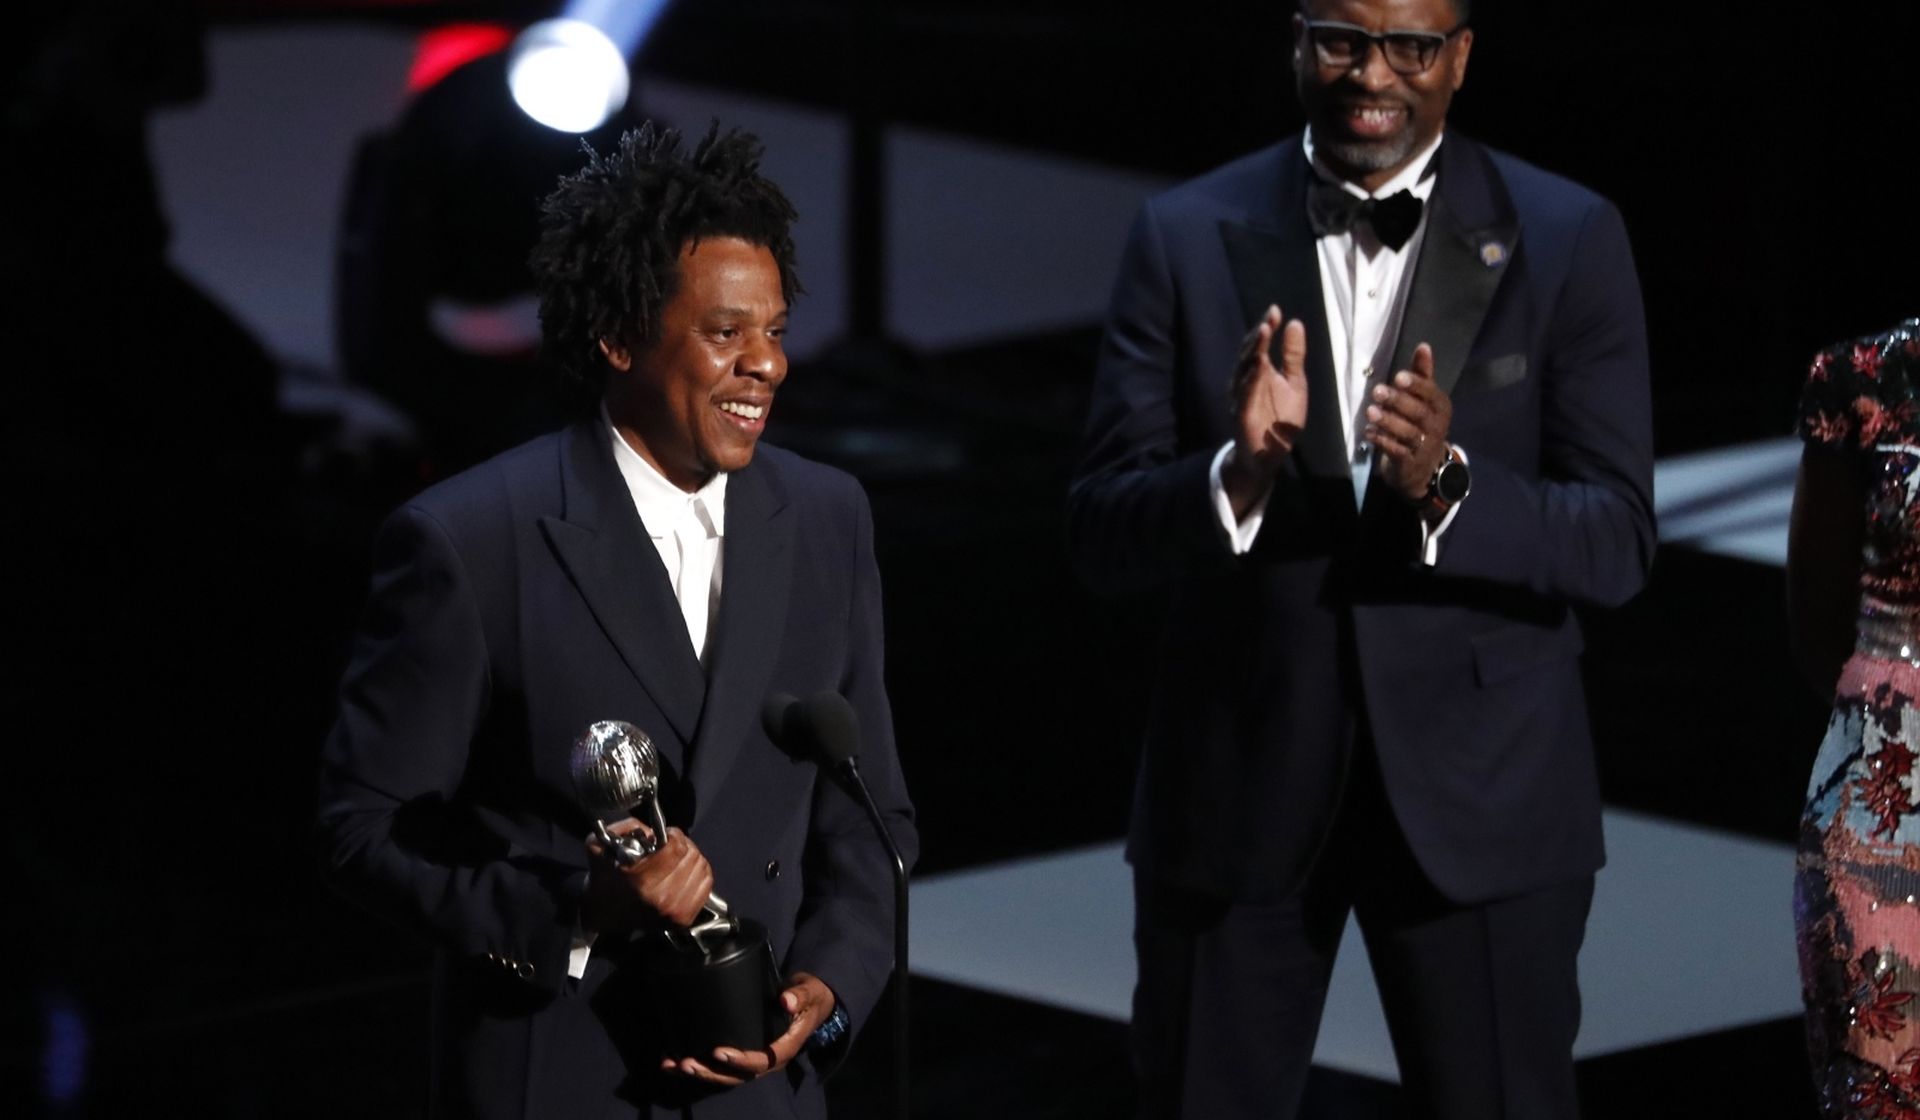 50th NAACP Image Awards - Show - Los Angeles, California, U.S. 50th NAACP Image Awards - Show - Los Angeles, California, U.S., March 30, 2019 - Jay-Z accepts the President's Award from NAACP President Derrick Johnson (R). REUTERS/Mario Anzuoni MARIO ANZUONI